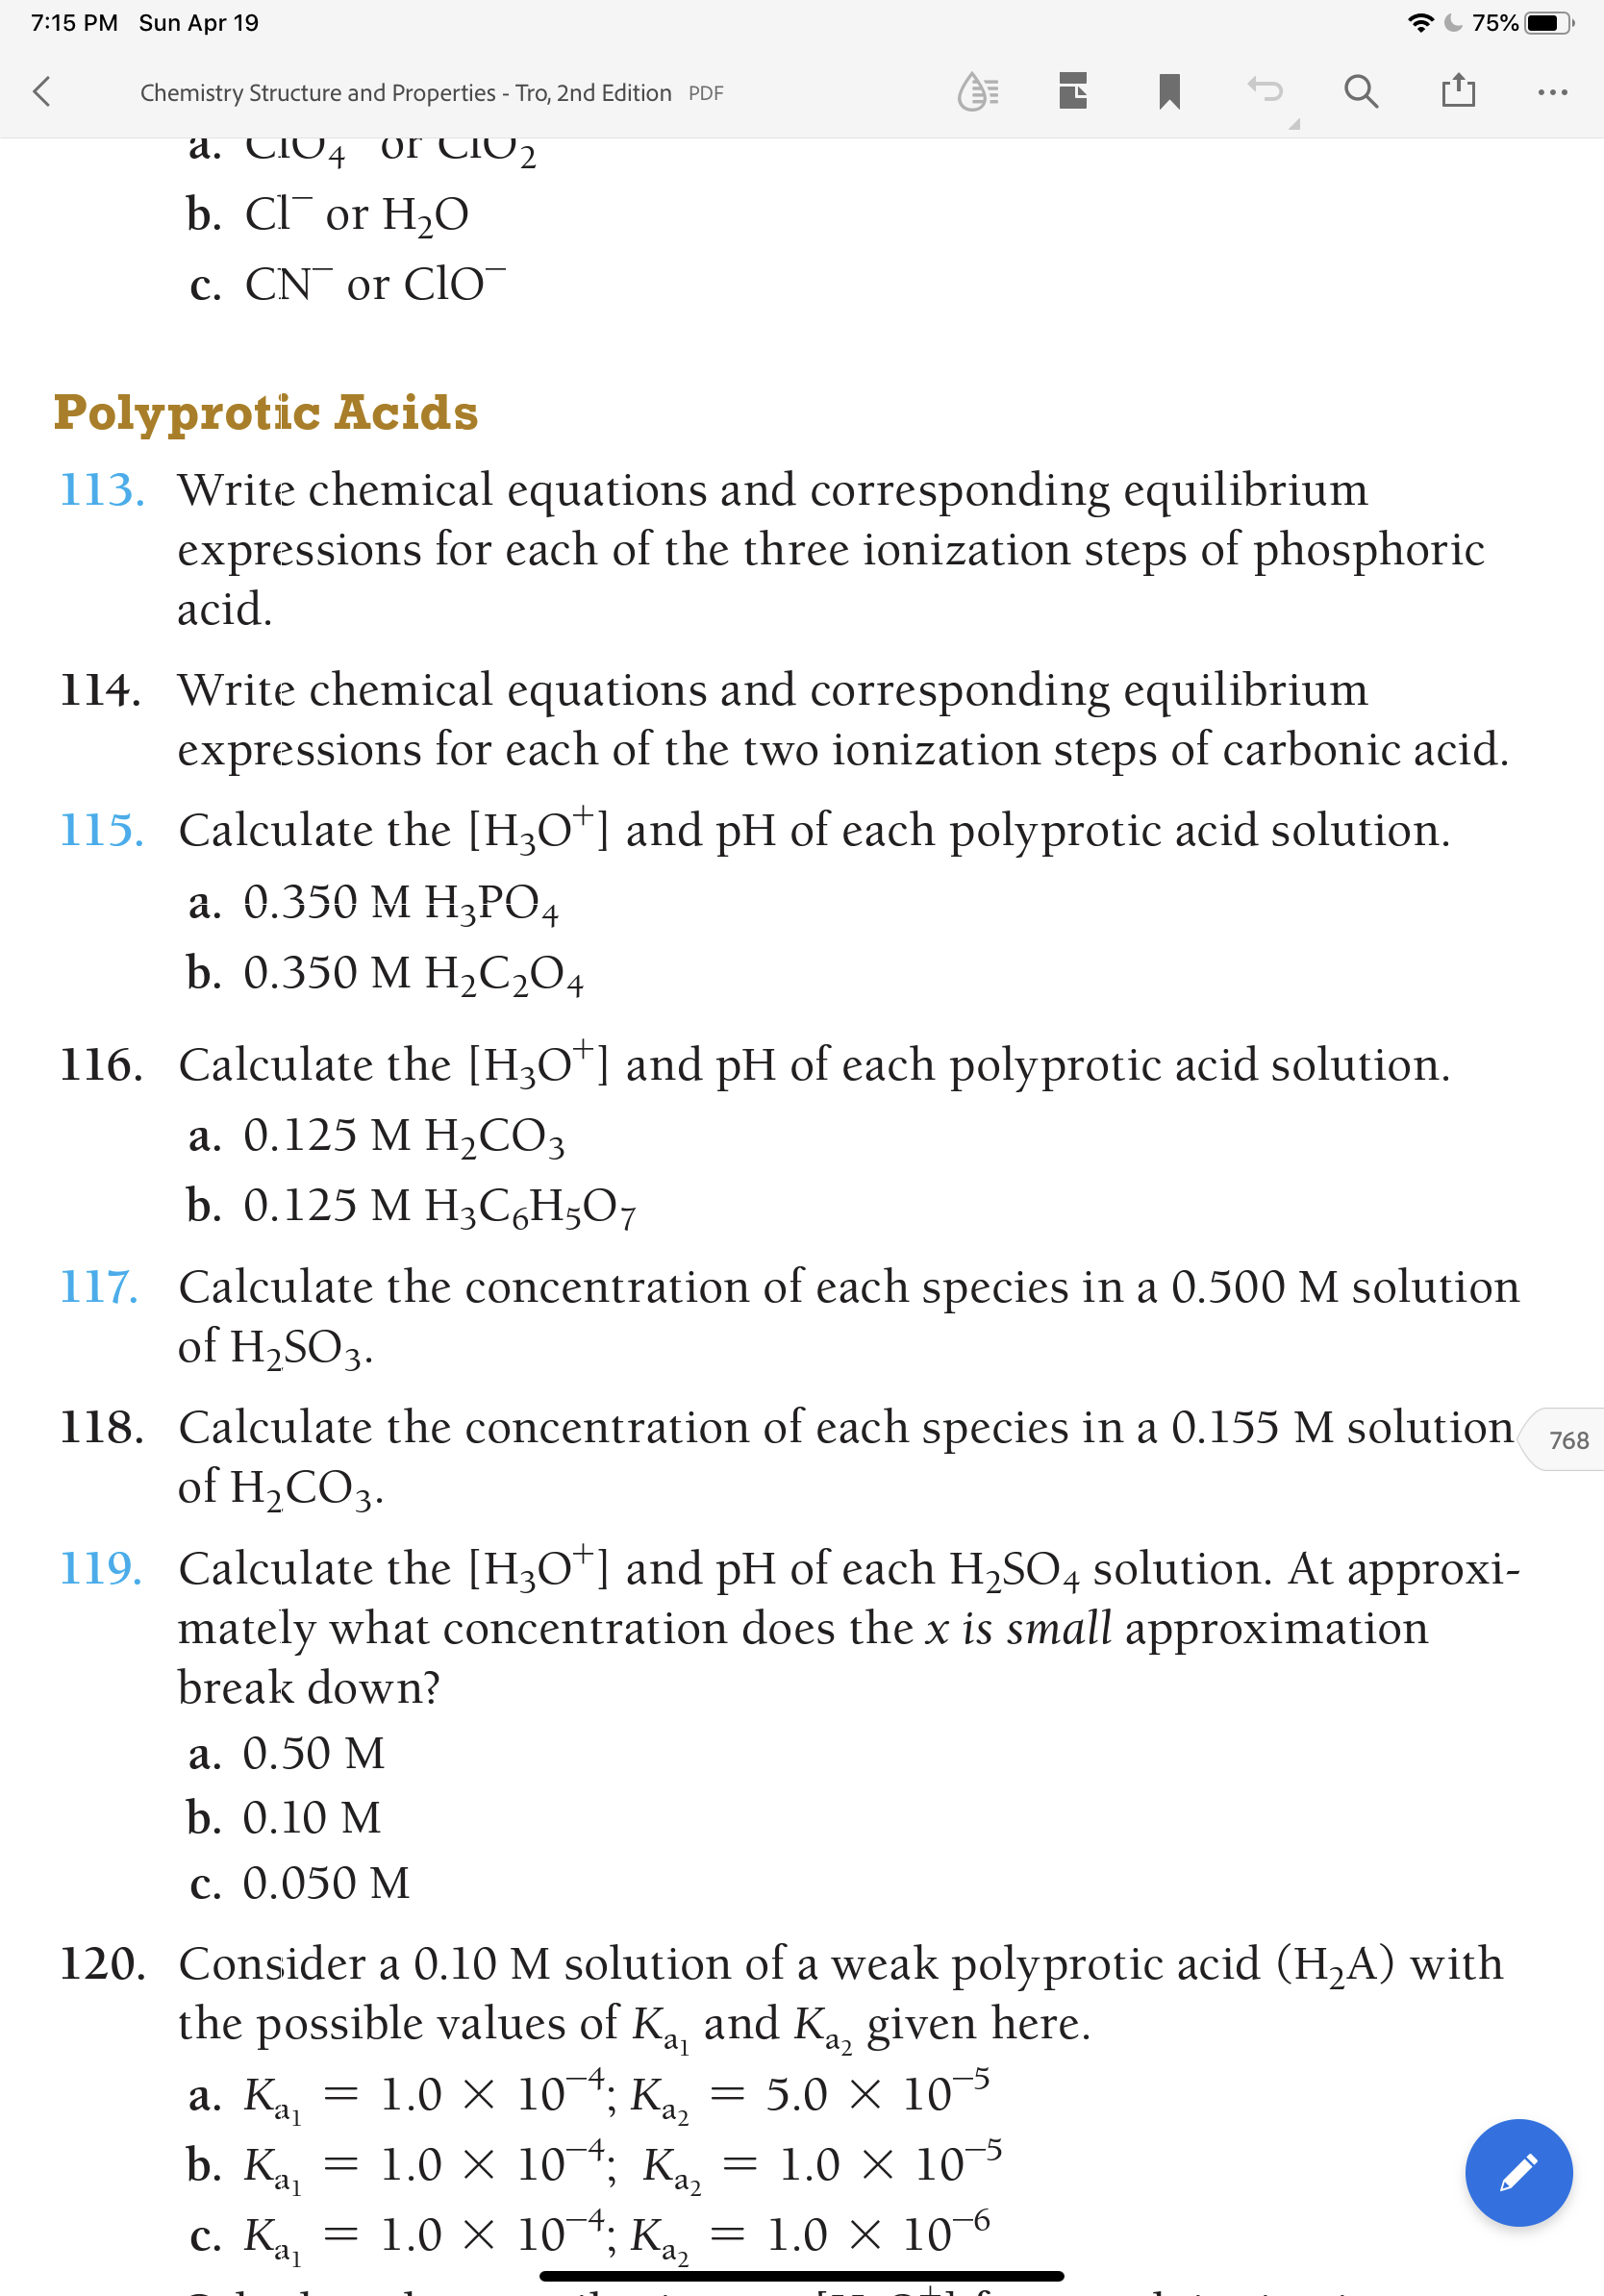 7:15 PM Sun Apr 19
75%
Chemistry Structure and Properties - Tro, 2nd Edition PDF
a. CIO4 0r CIO2
b. Cl or H,O
c. CN¯ or ClO
Polyprotic Acids
113. Write chemical equations and corresponding equilibrium
expressions for each of the three ionization steps of phosphoric
acid.
114. Write chemical equations and corresponding equilibrium
expressions for each of the two ionization steps of carbonic acid.
115. Calculate the [H3O*] and pH of each polyprotic acid solution.
а. О.350 М НЗРО4
b. 0.350 M H,C2O4
116. Calculate the [H3O*] and pH of each polyprotic acid solution.
а. О.125 М Н,СОЗ
b. 0.125 M H3C6H;O7
117. Calculate the concentration of each species in a 0.500 M solution
of H2SO3.
118. Calculate the concentration of each species in a 0.155 M solution
of H,COз-
768
119. Calculate the [H3O*] and pH of each H2SO4 solution. At approxi-
mately what concentration does the x is small approximation
break down?
a. 0.50 M
b. 0.10 M
c. 0.050 M
120. Consider a 0.10 M solution of a weak polyprotic acid (H,A) with
the possible values of Ka and Ka, given here.
a. Ka
аз
= 1.0 X 10¯*; K,
5.0 X 10-5
j
b. Ka
1.0 X 10*; Ka.
= 1.0 X 10-5
c. K.
1.0 X 104; K,
аз
1.0 X 10-6
